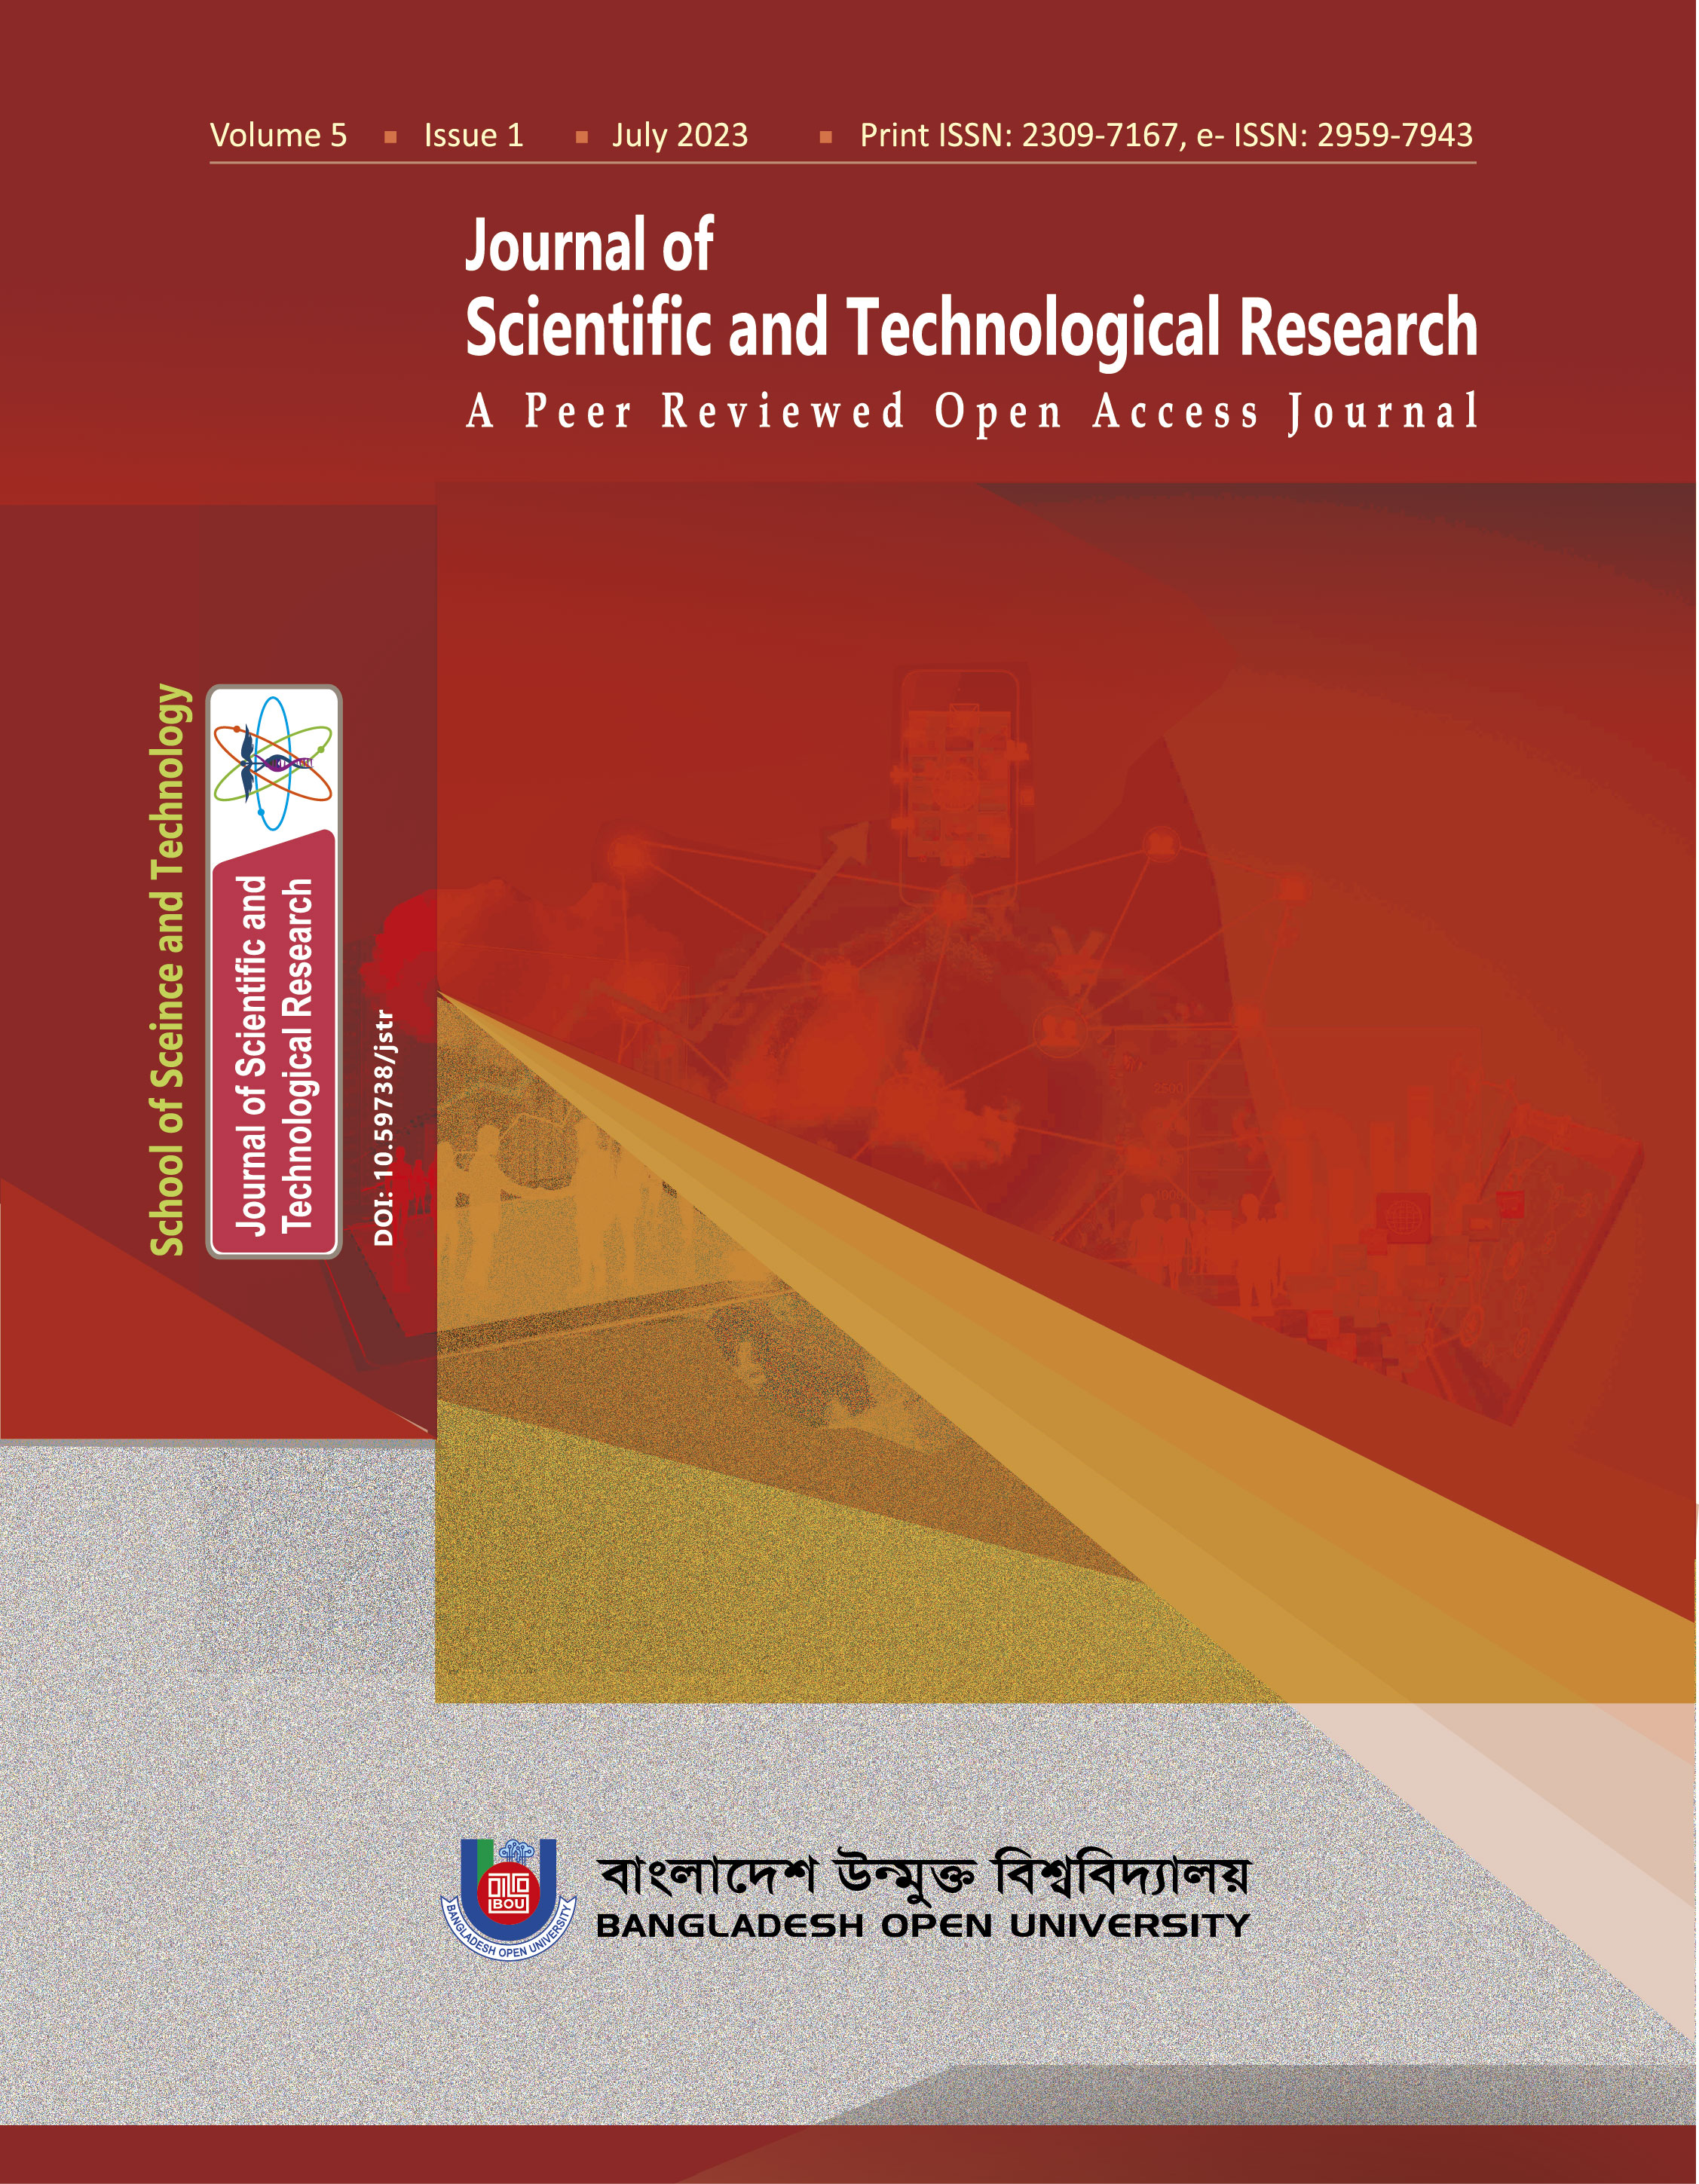 					View Vol. 5 No. 1 (2023): Journal of Scientific and Technological Research (JSTR)
				